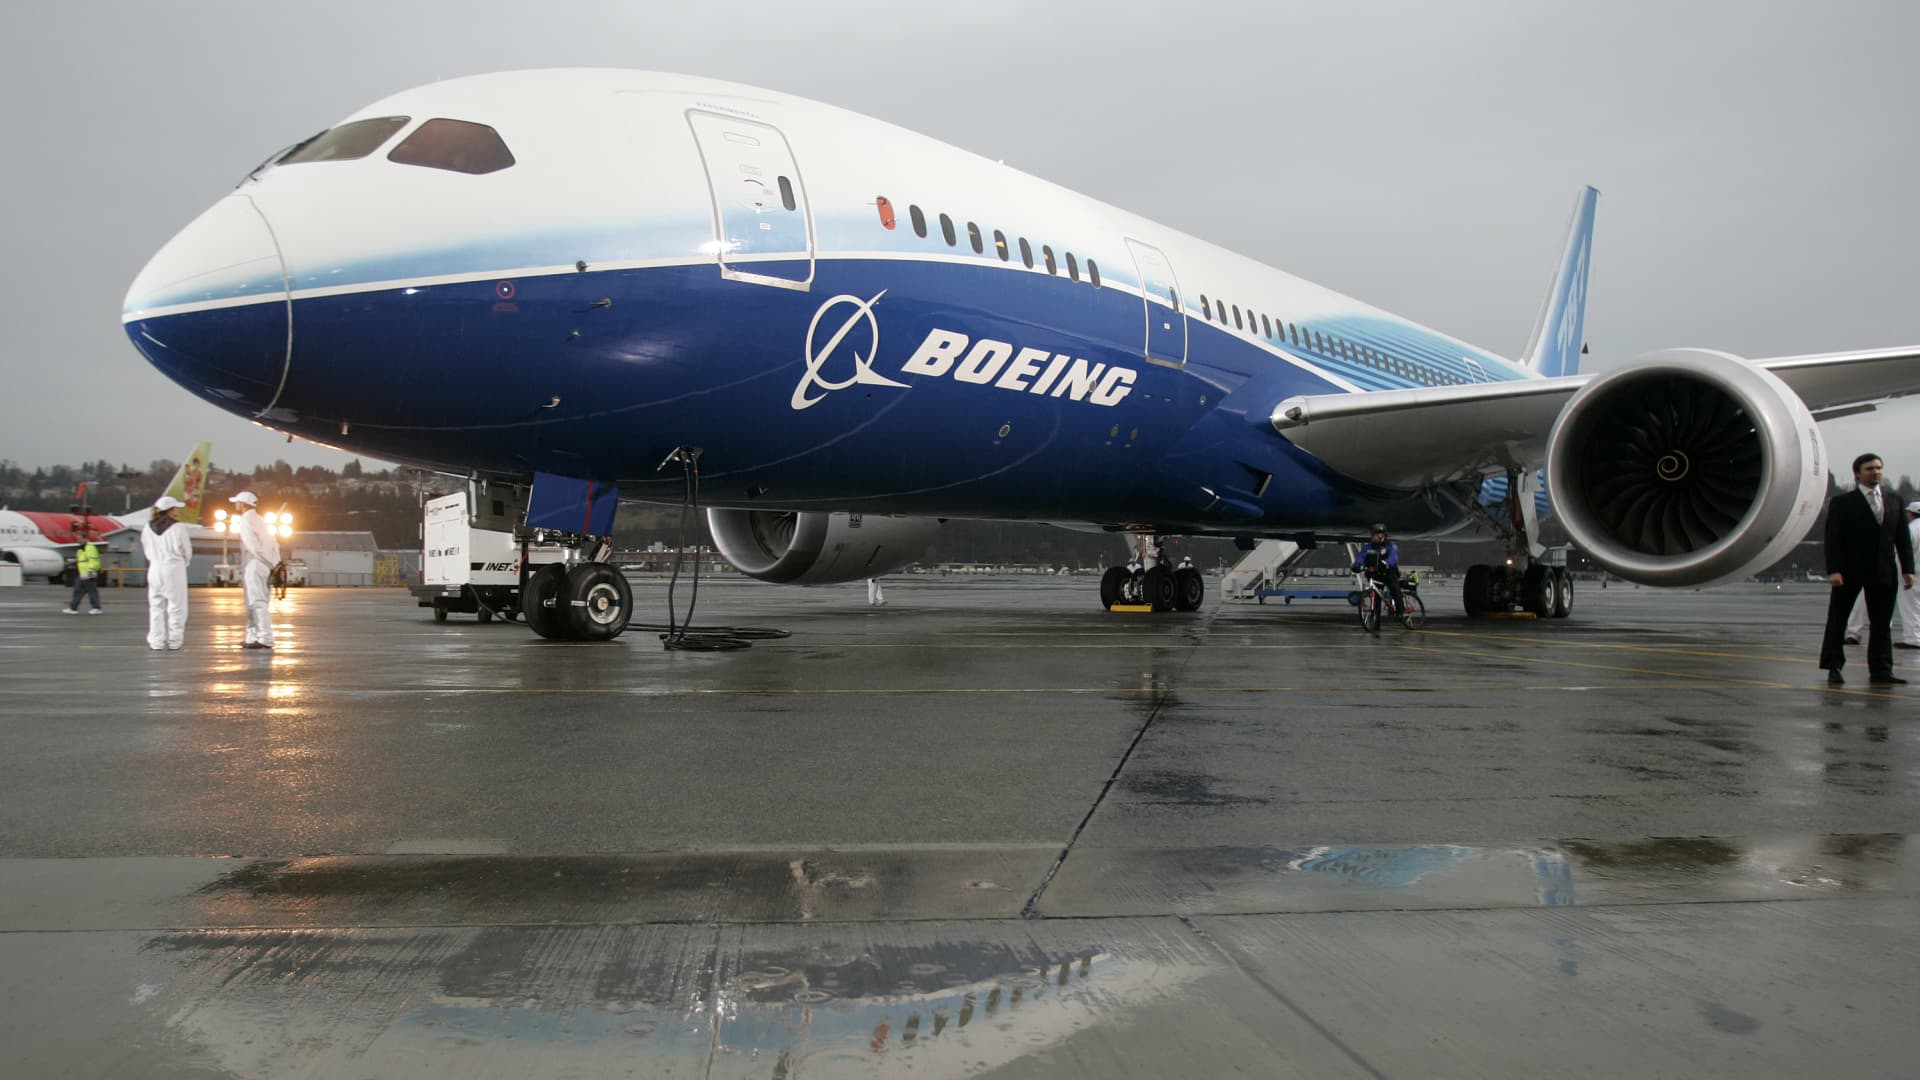 Boeing hands over first 787 Dreamliner to China since 2019